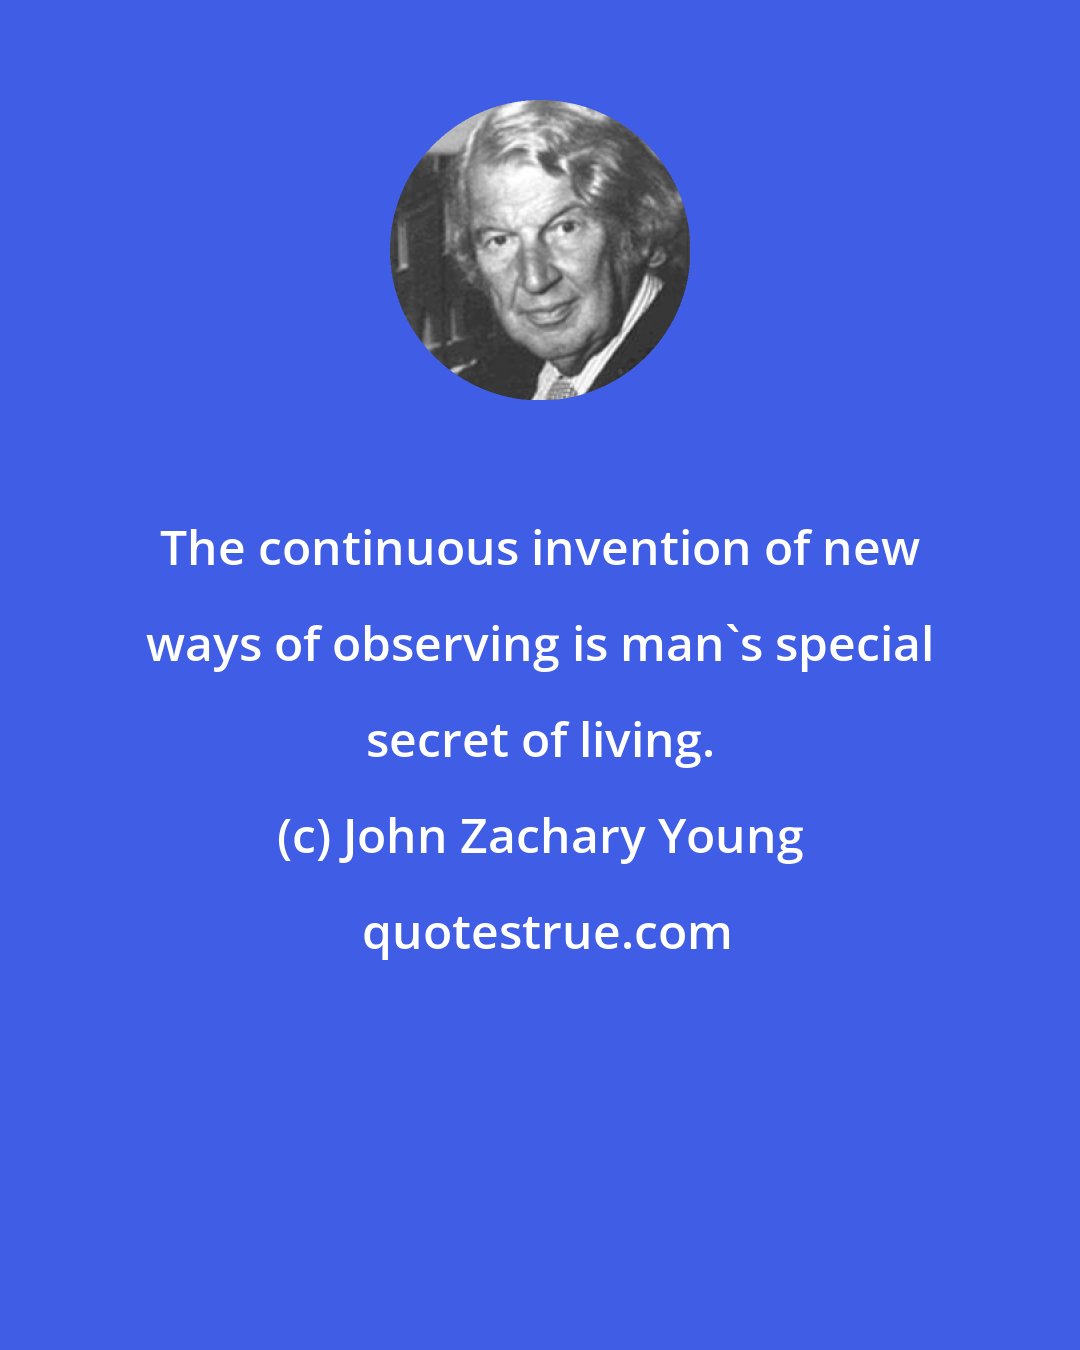 John Zachary Young: The continuous invention of new ways of observing is man's special secret of living.